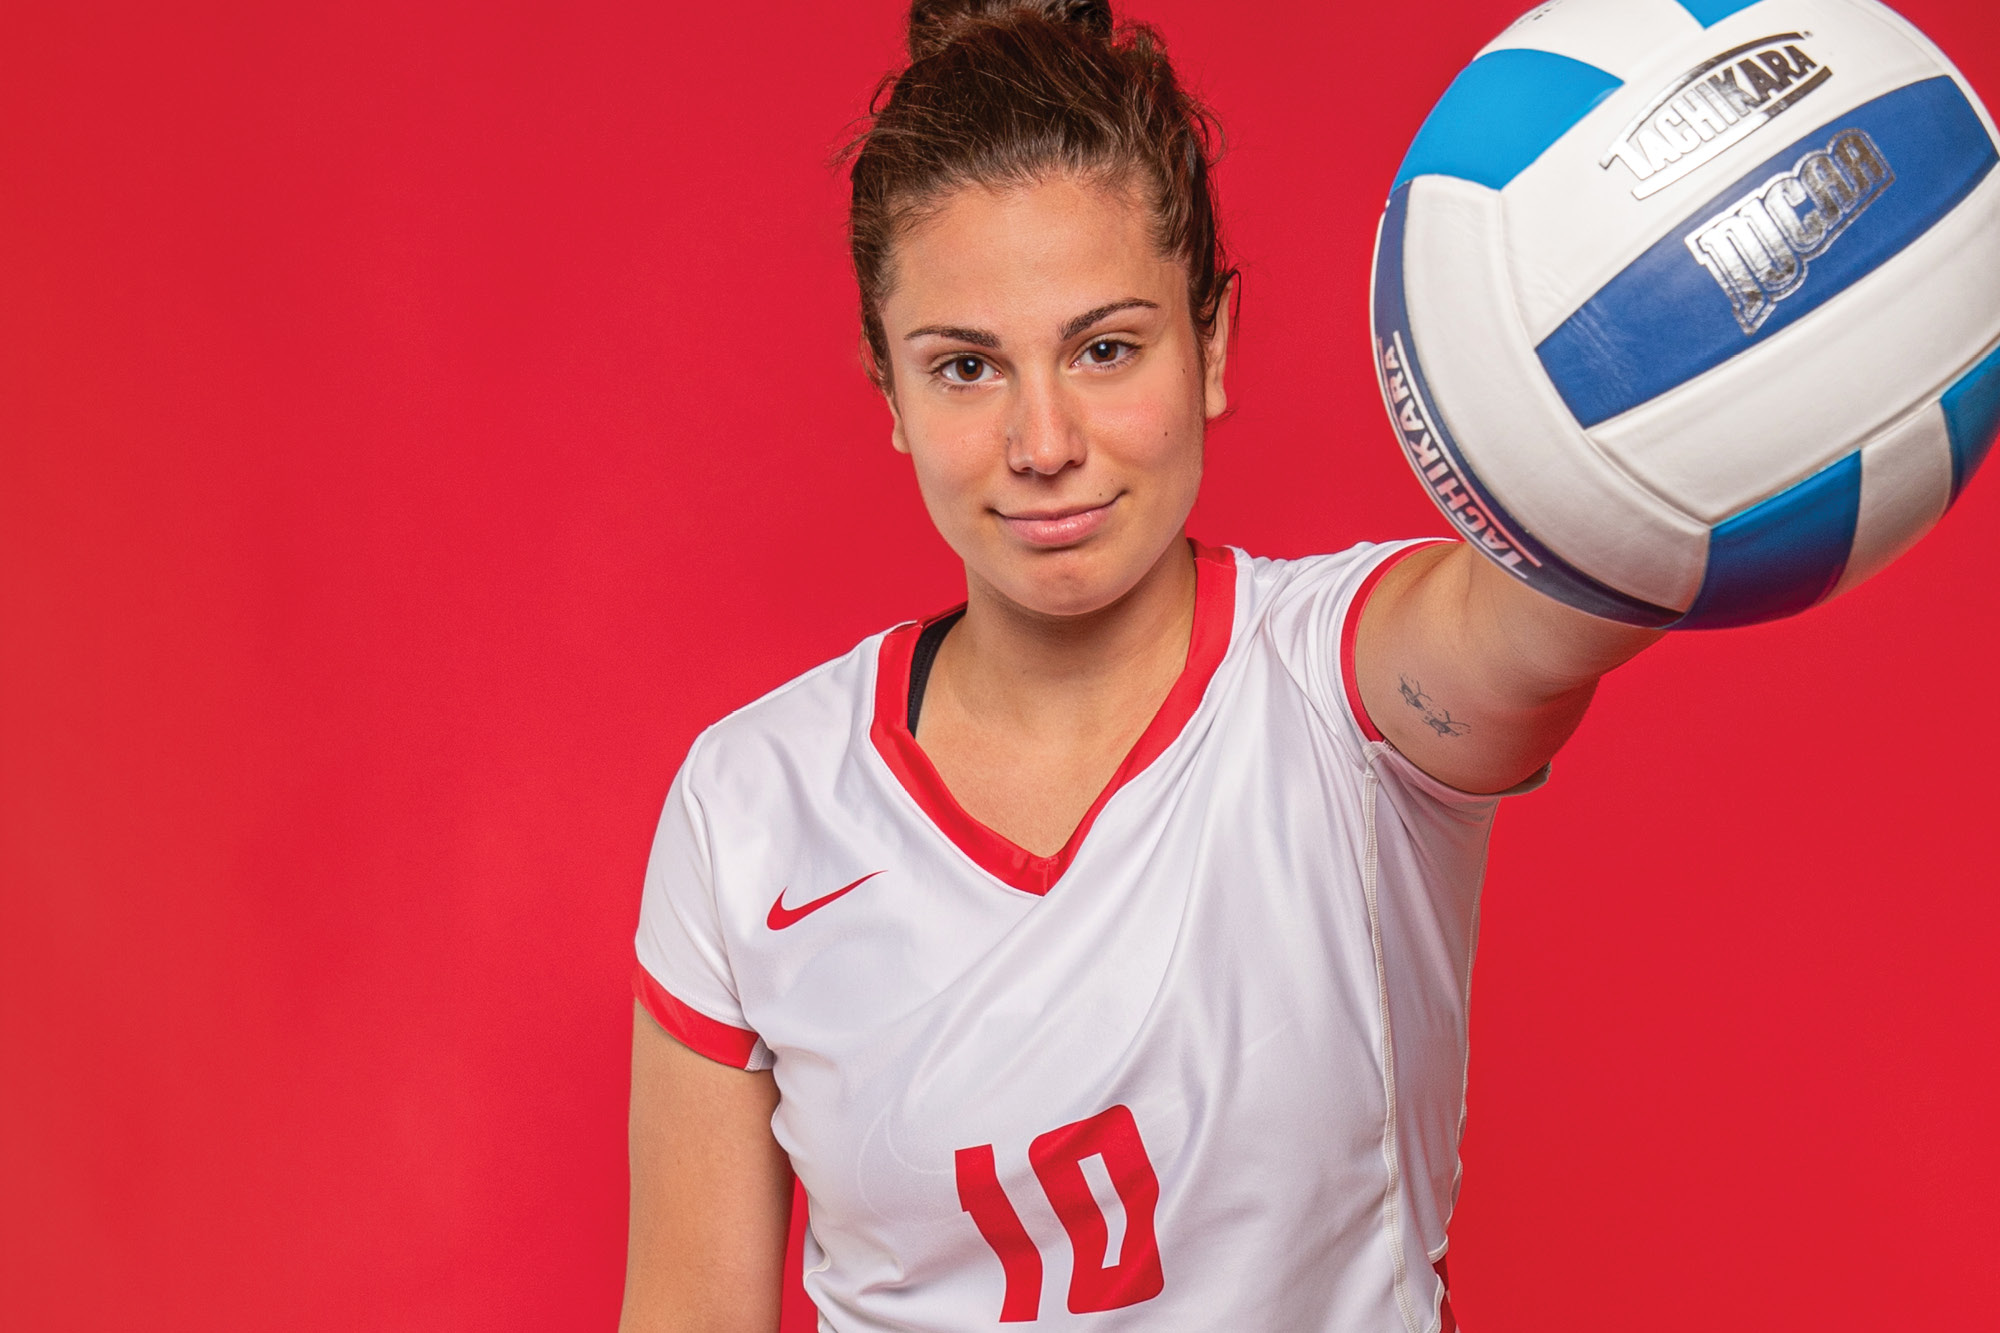 Photo of Casper College volleyball player Jovana Jeremic holding a volleyball